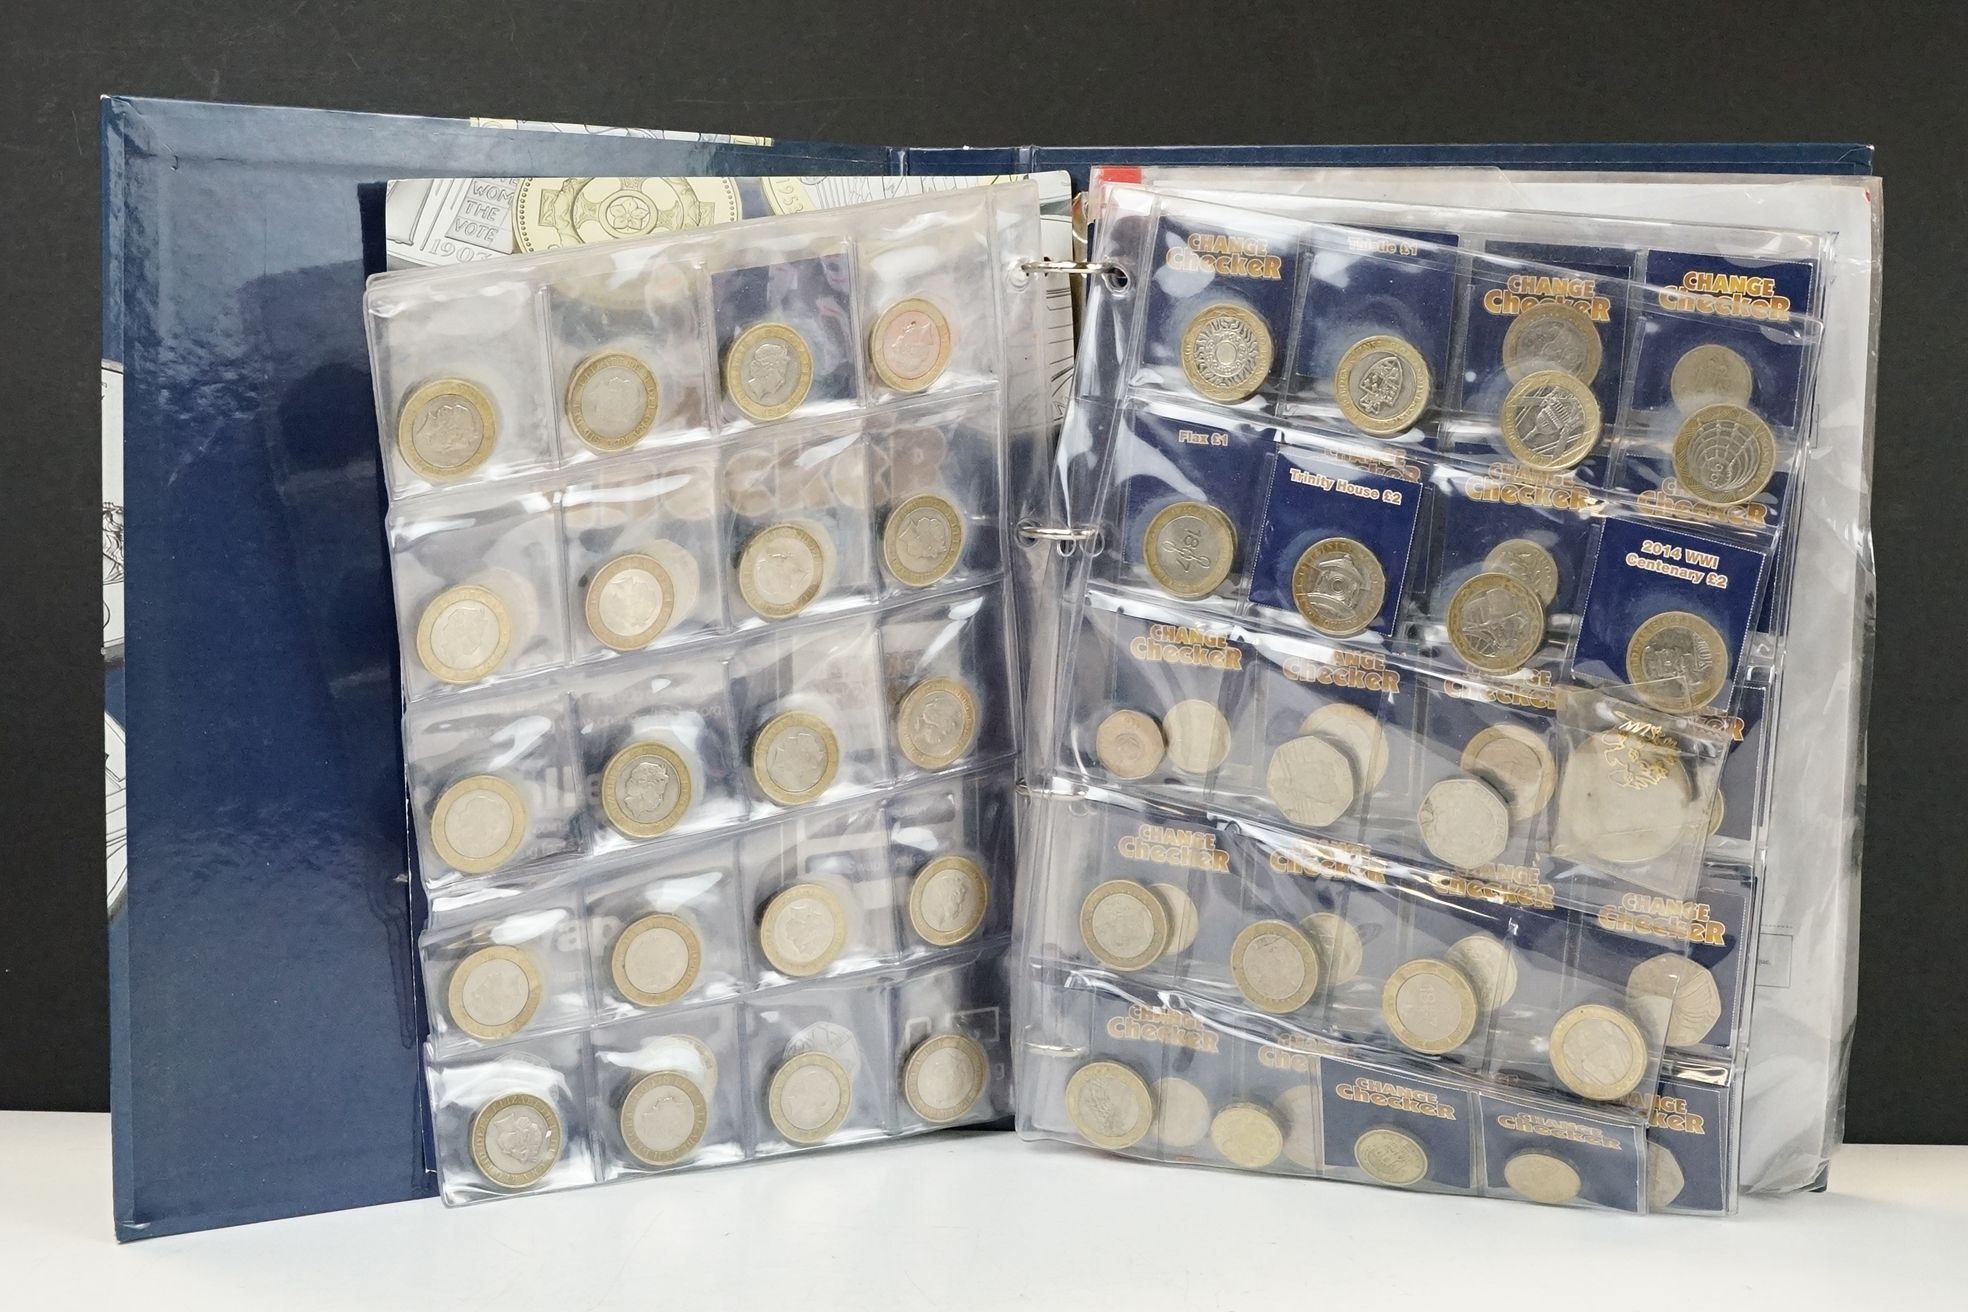 A collection of British decimal collectable £2, £1 and 50p coins contained within a change checker